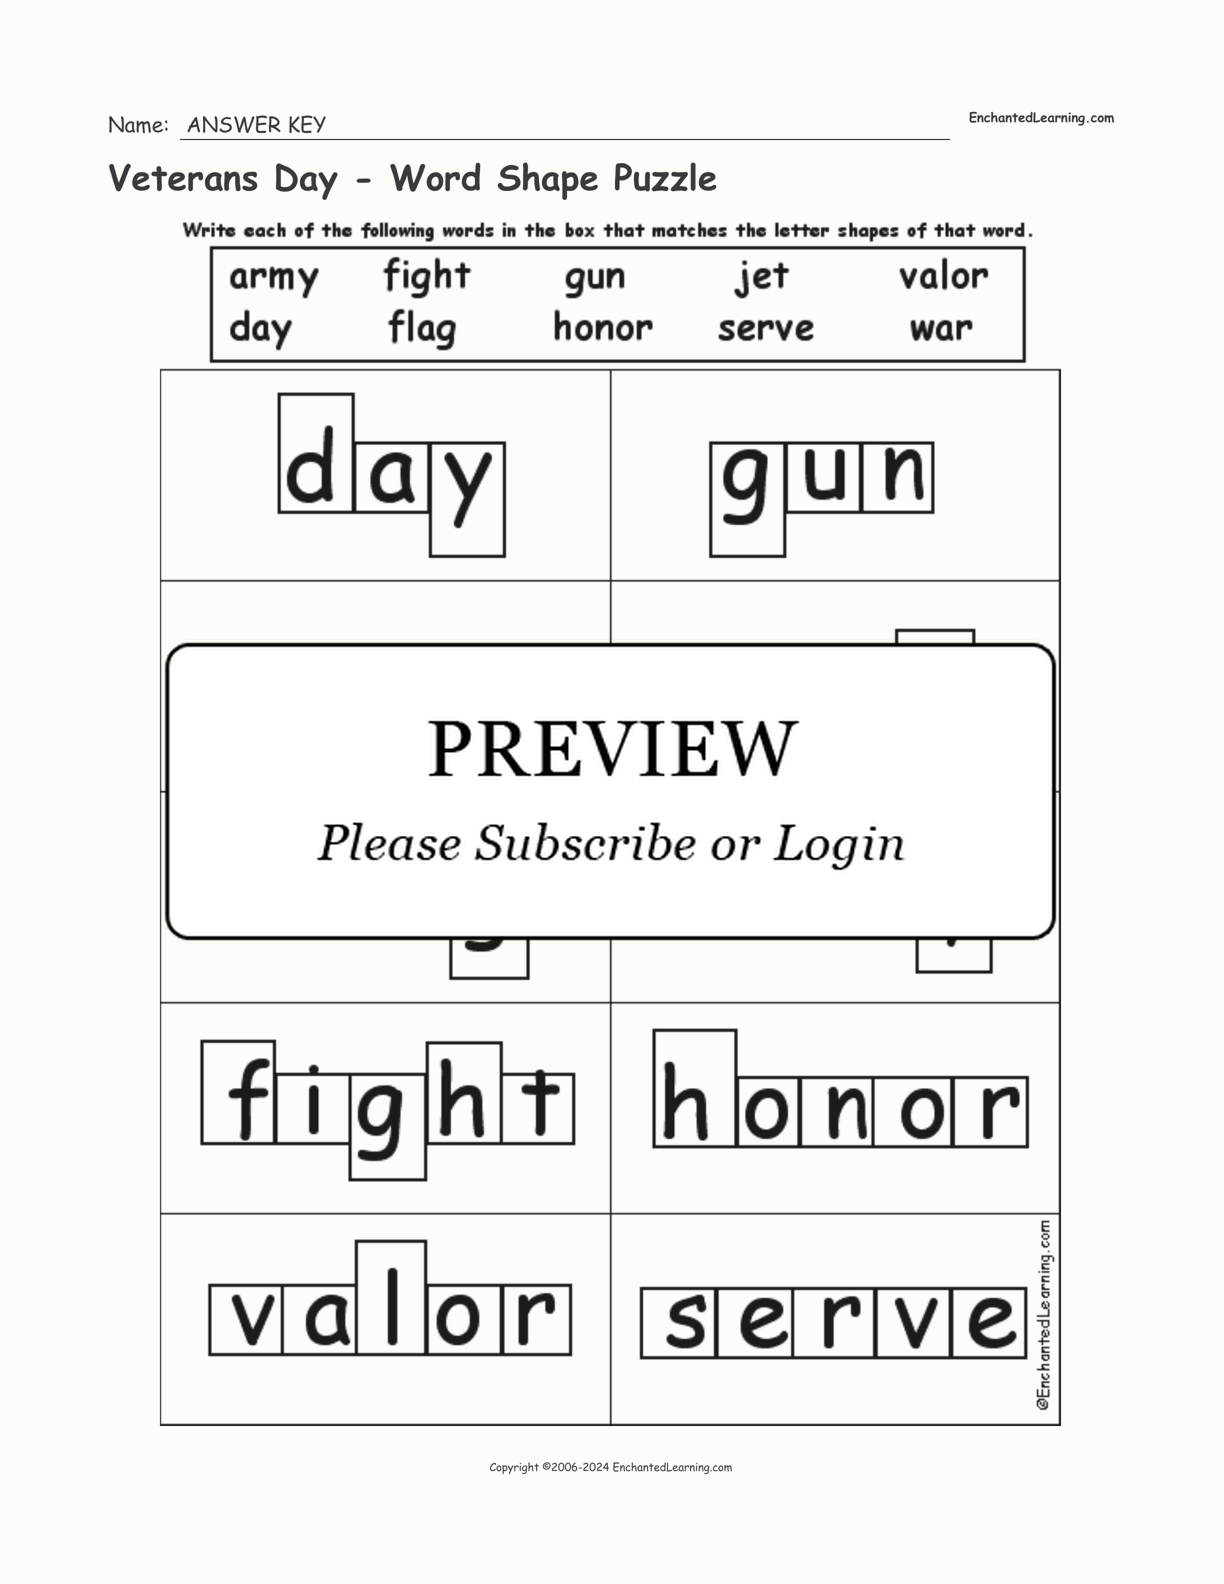 Veterans Day - Word Shape Puzzle interactive worksheet page 2